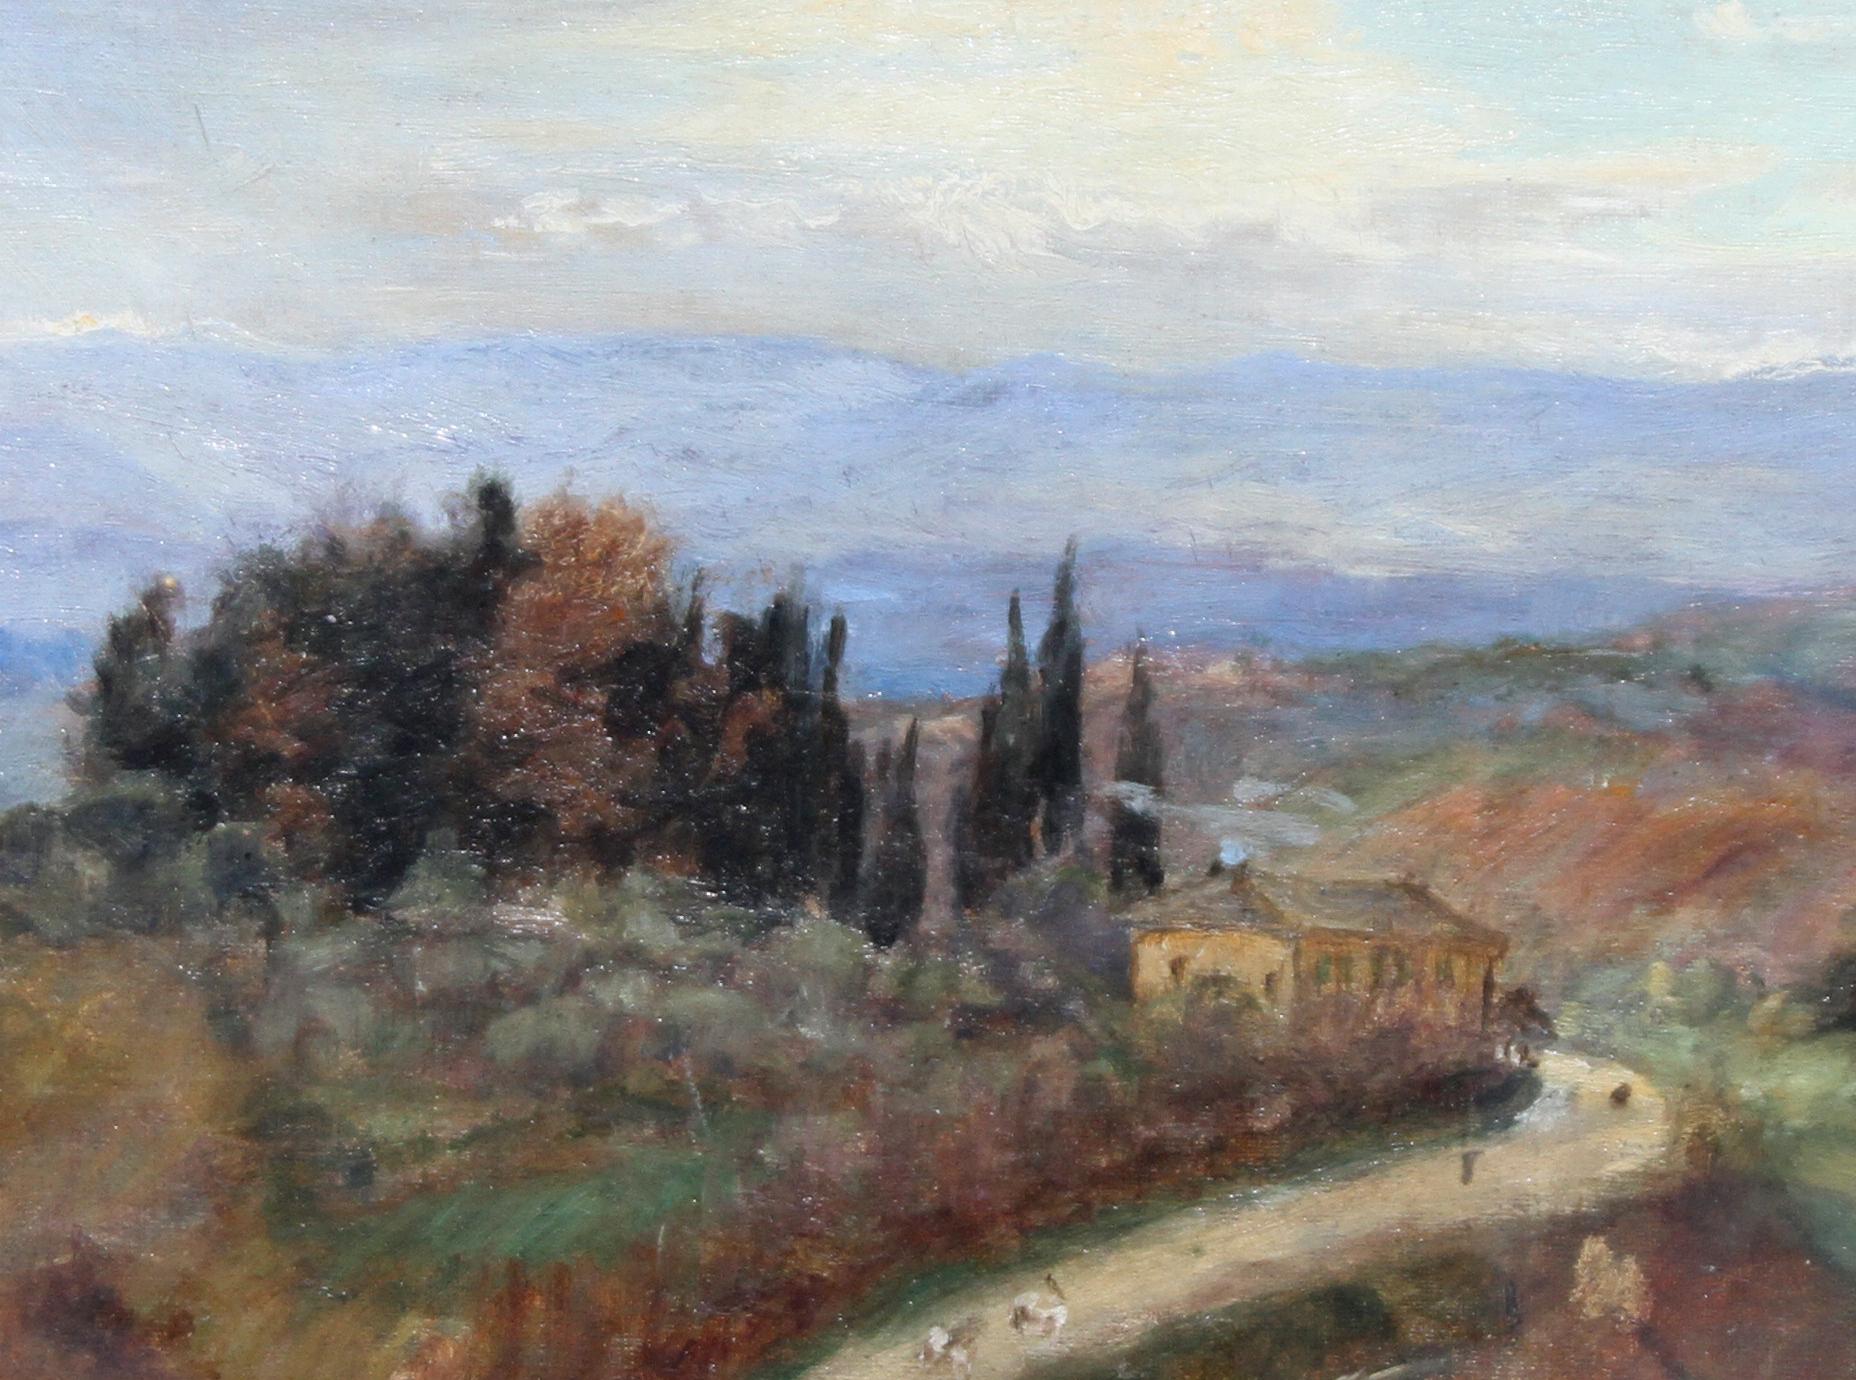 This Italian landscape is an oil on canvas, framed behind glass in its original gallery frame, by Susan Isabel Dacre. A superb painting, painted circa 1888. Dacre was an early member of the Feminist movement and a member of the Manchester arts